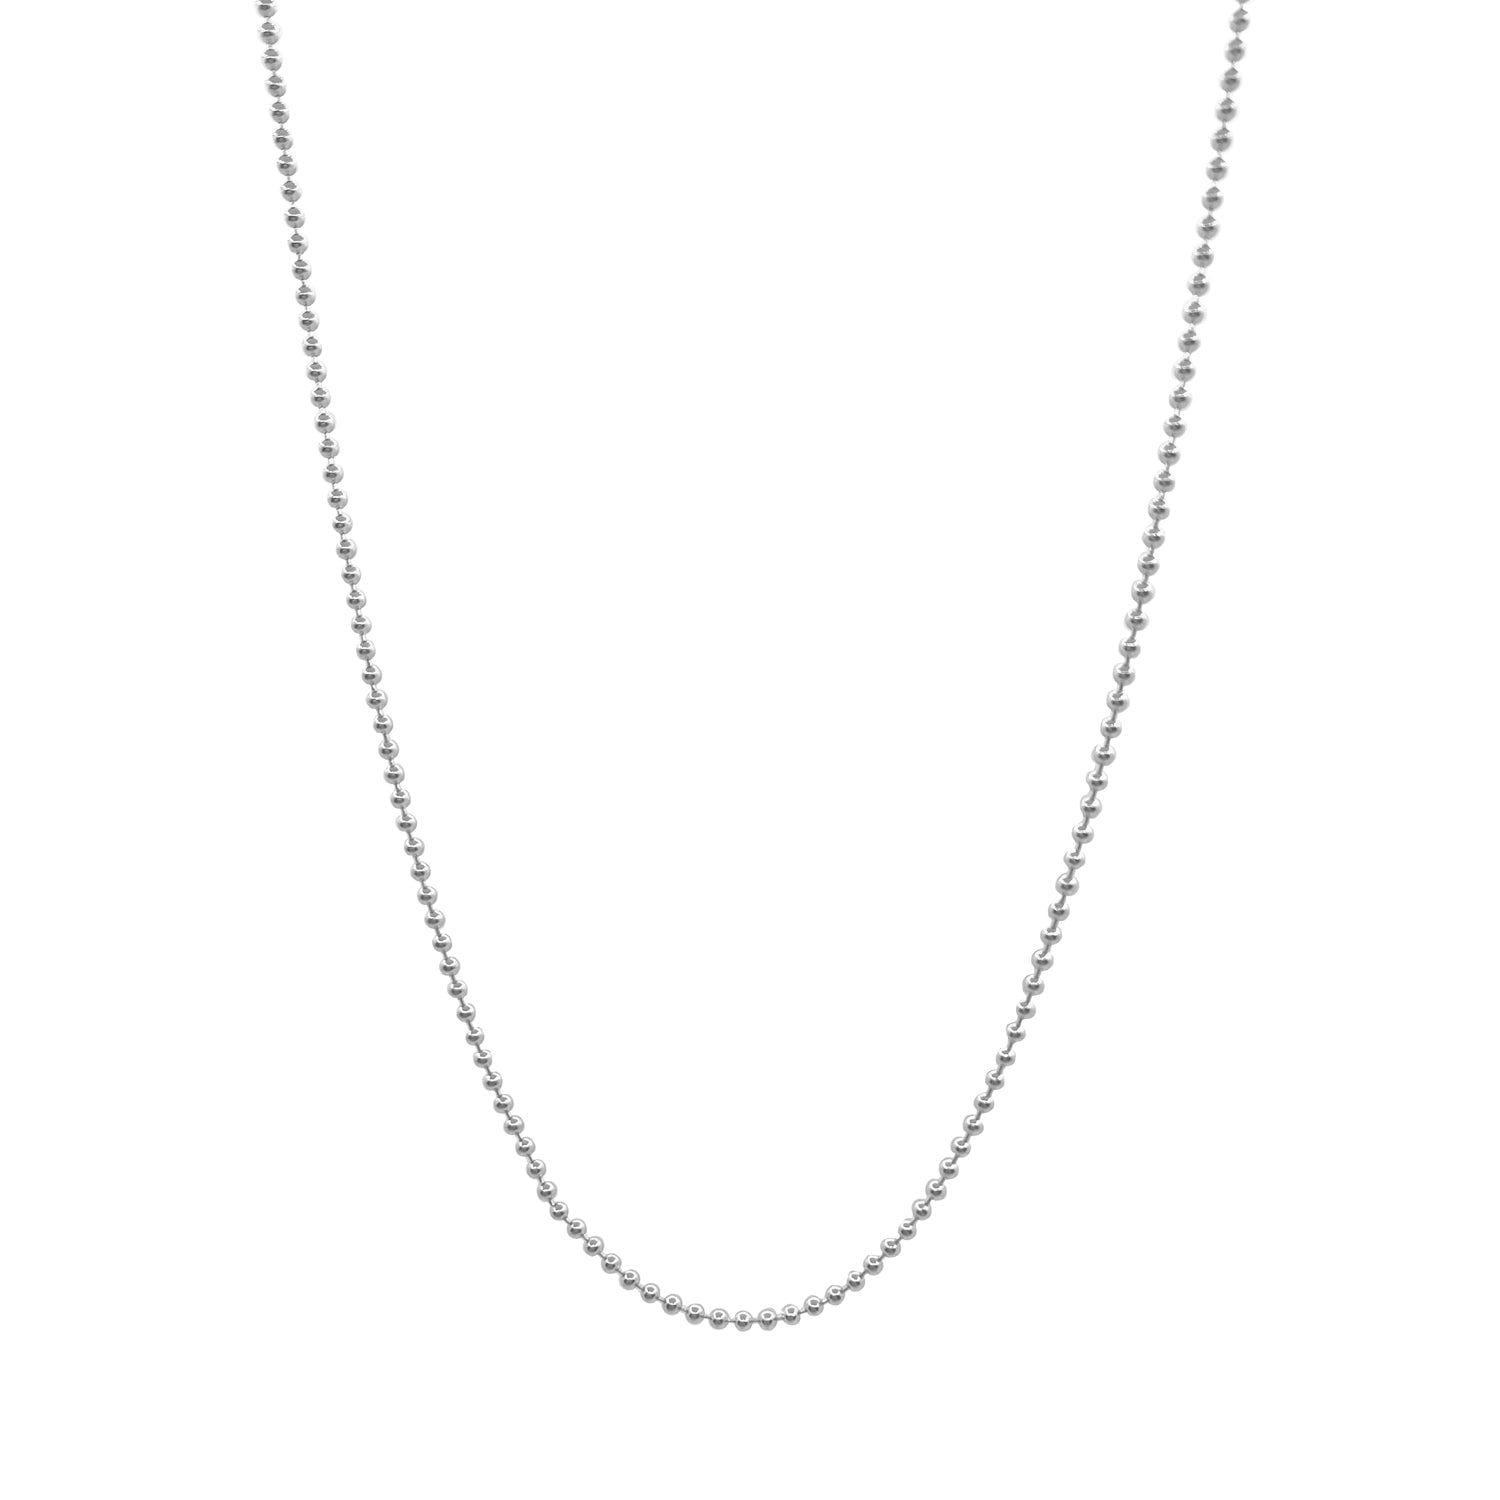 Beads Chain Necklace